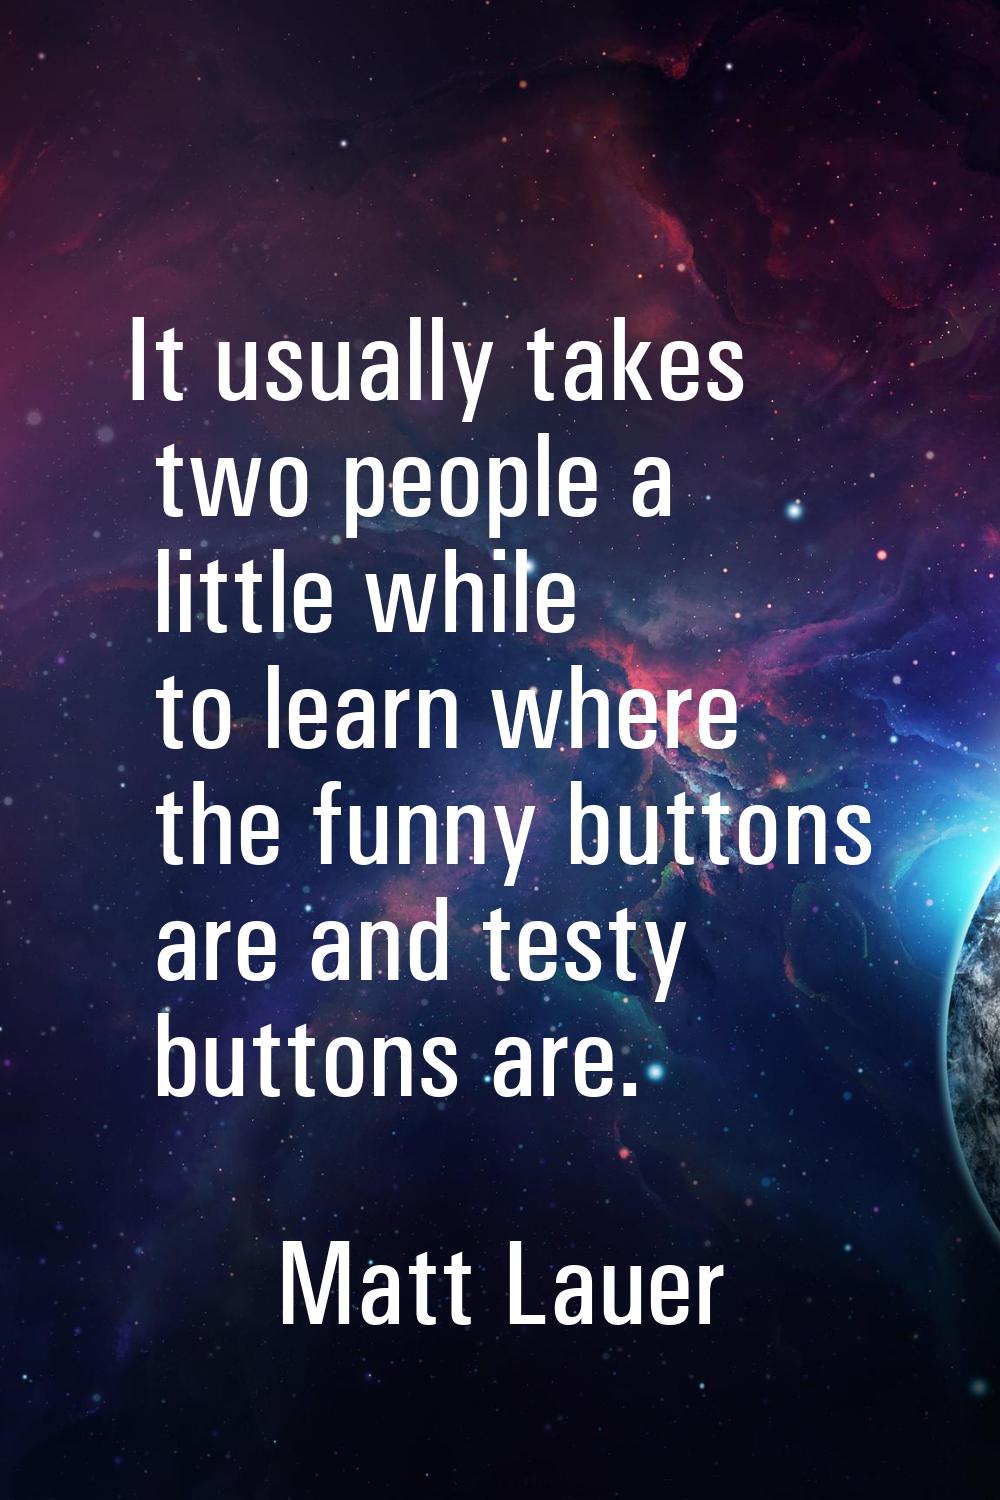 It usually takes two people a little while to learn where the funny buttons are and testy buttons a